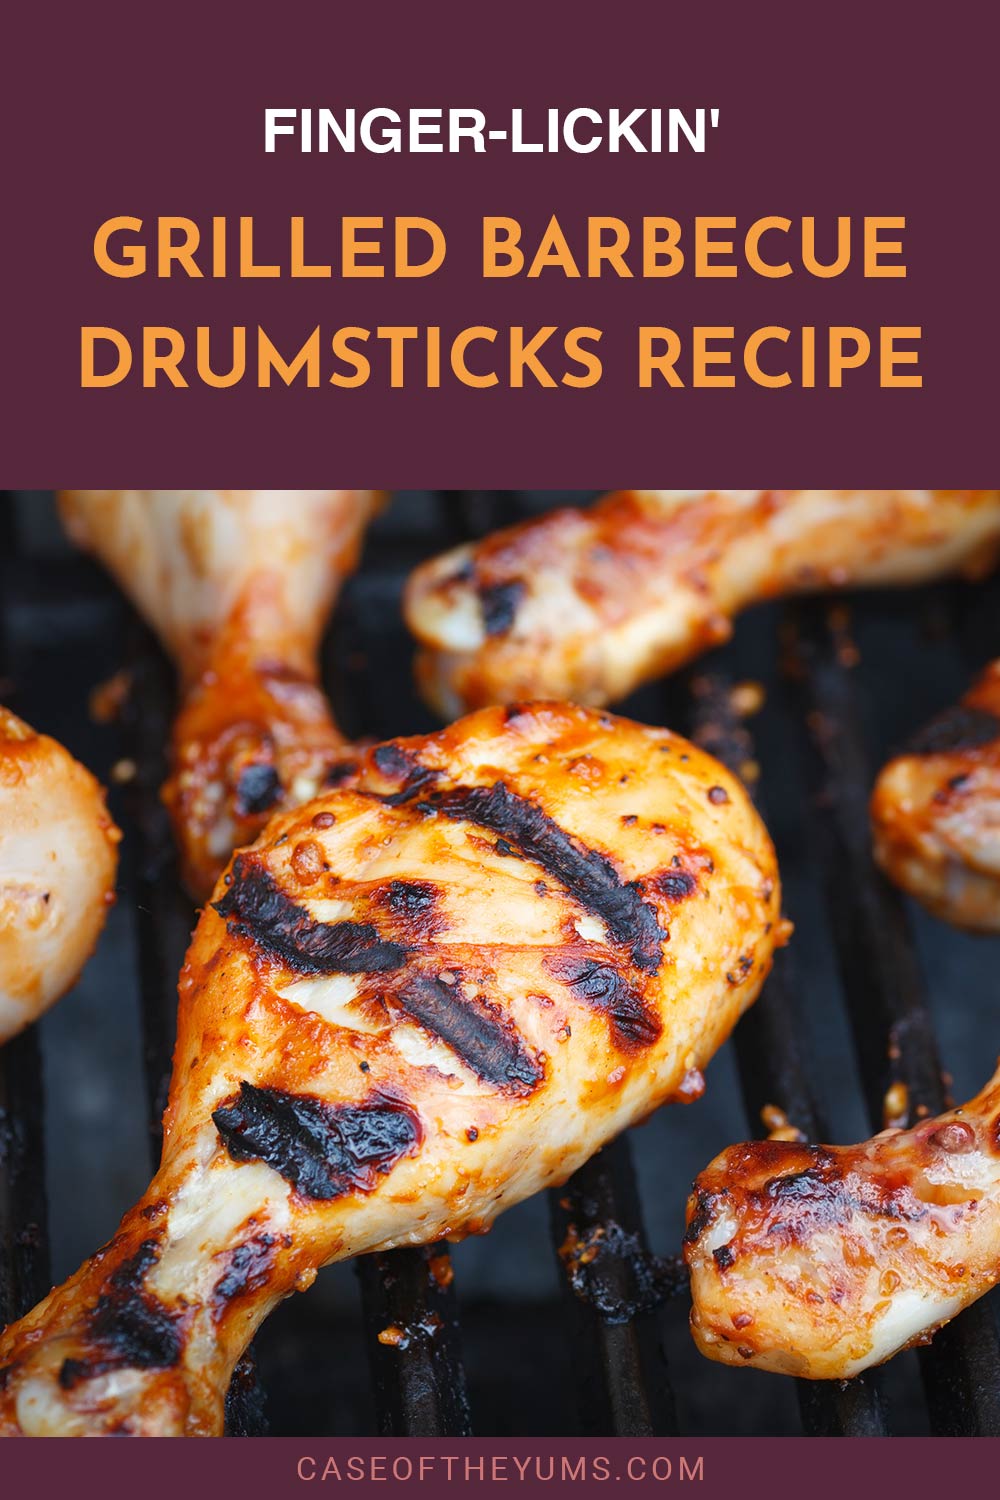 Barbecue chicken on grill - Finger-Lickin' Grilled Barbecue Drumsticks Recipe.